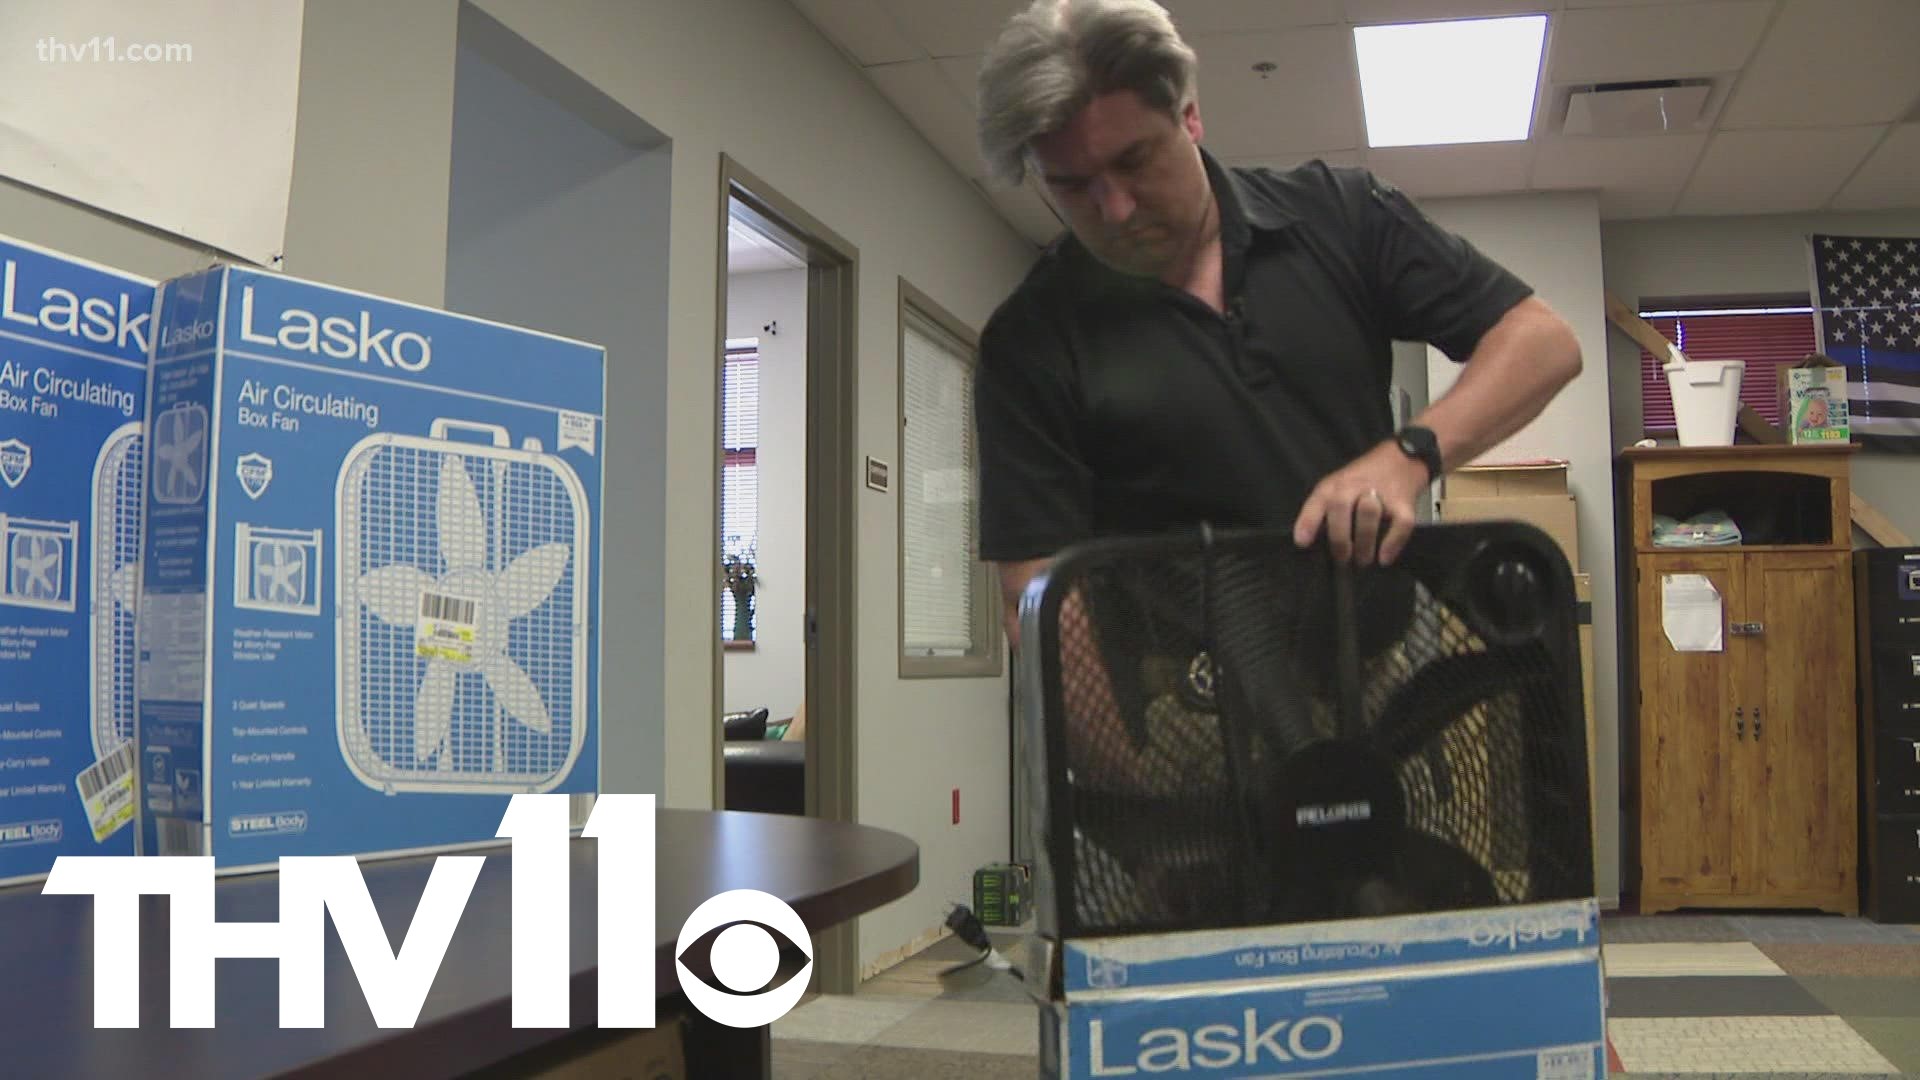 Sheriff's in Lonoke County typically give away about 100-200 fans and 50 A/C units to keep people cool during summer but in order to do so, they rely on donations